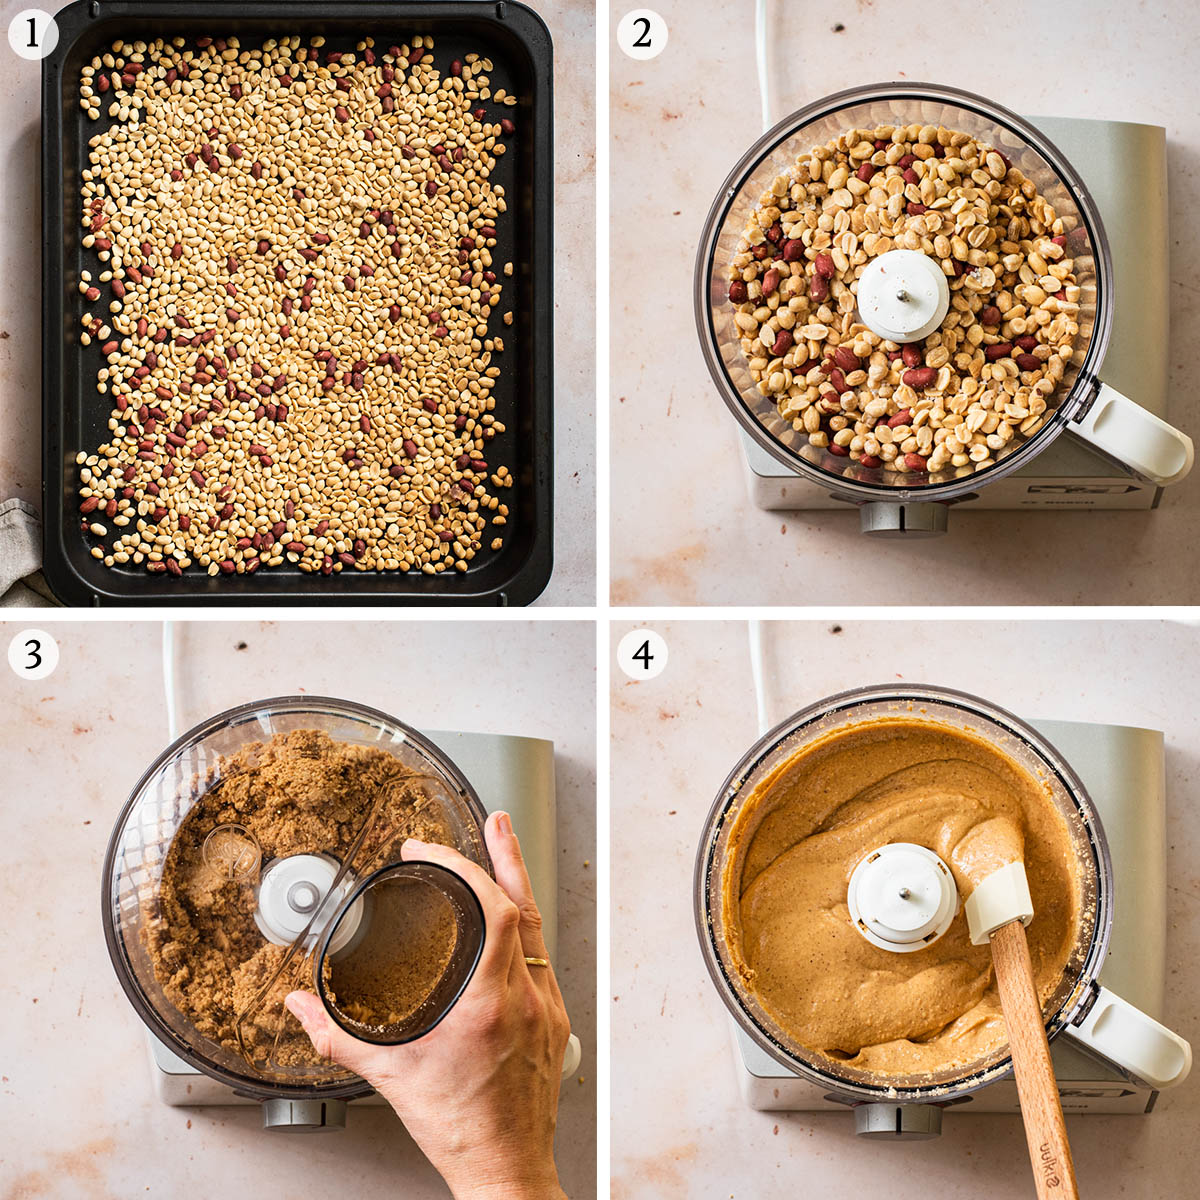 Homemade peanut butter steps 1 to 4.